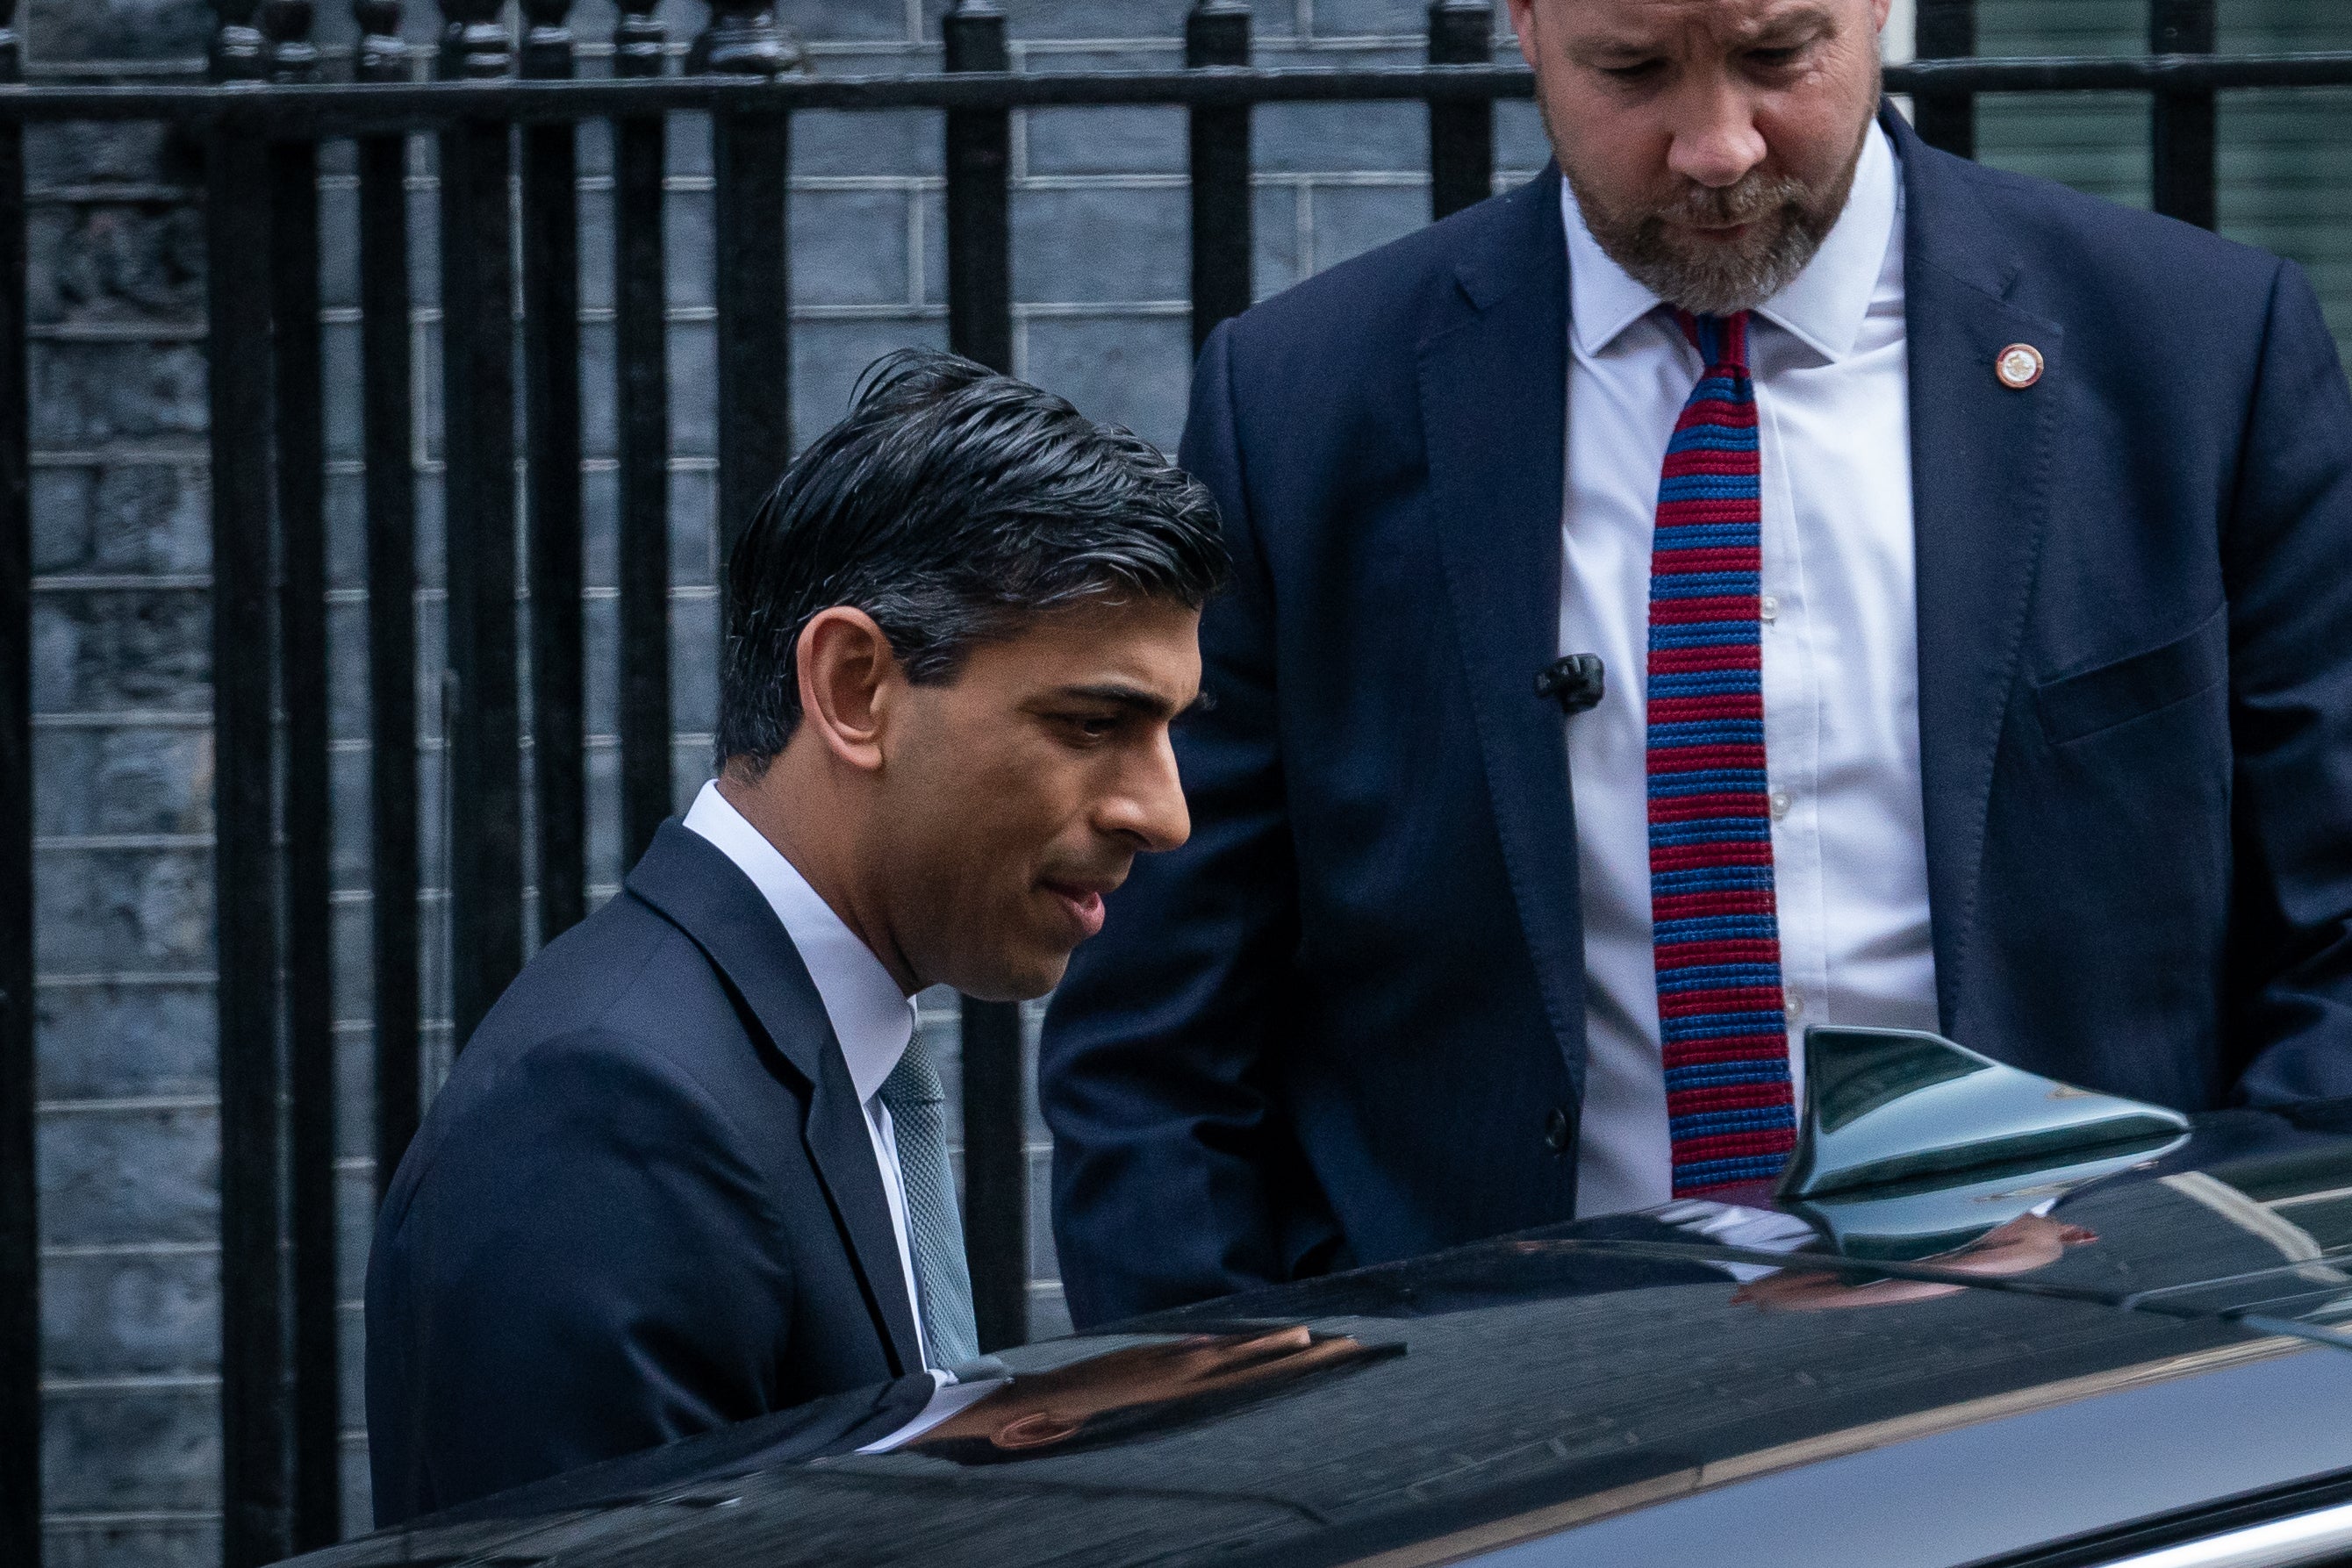 Sunak leaves Downing Street for the spring statement